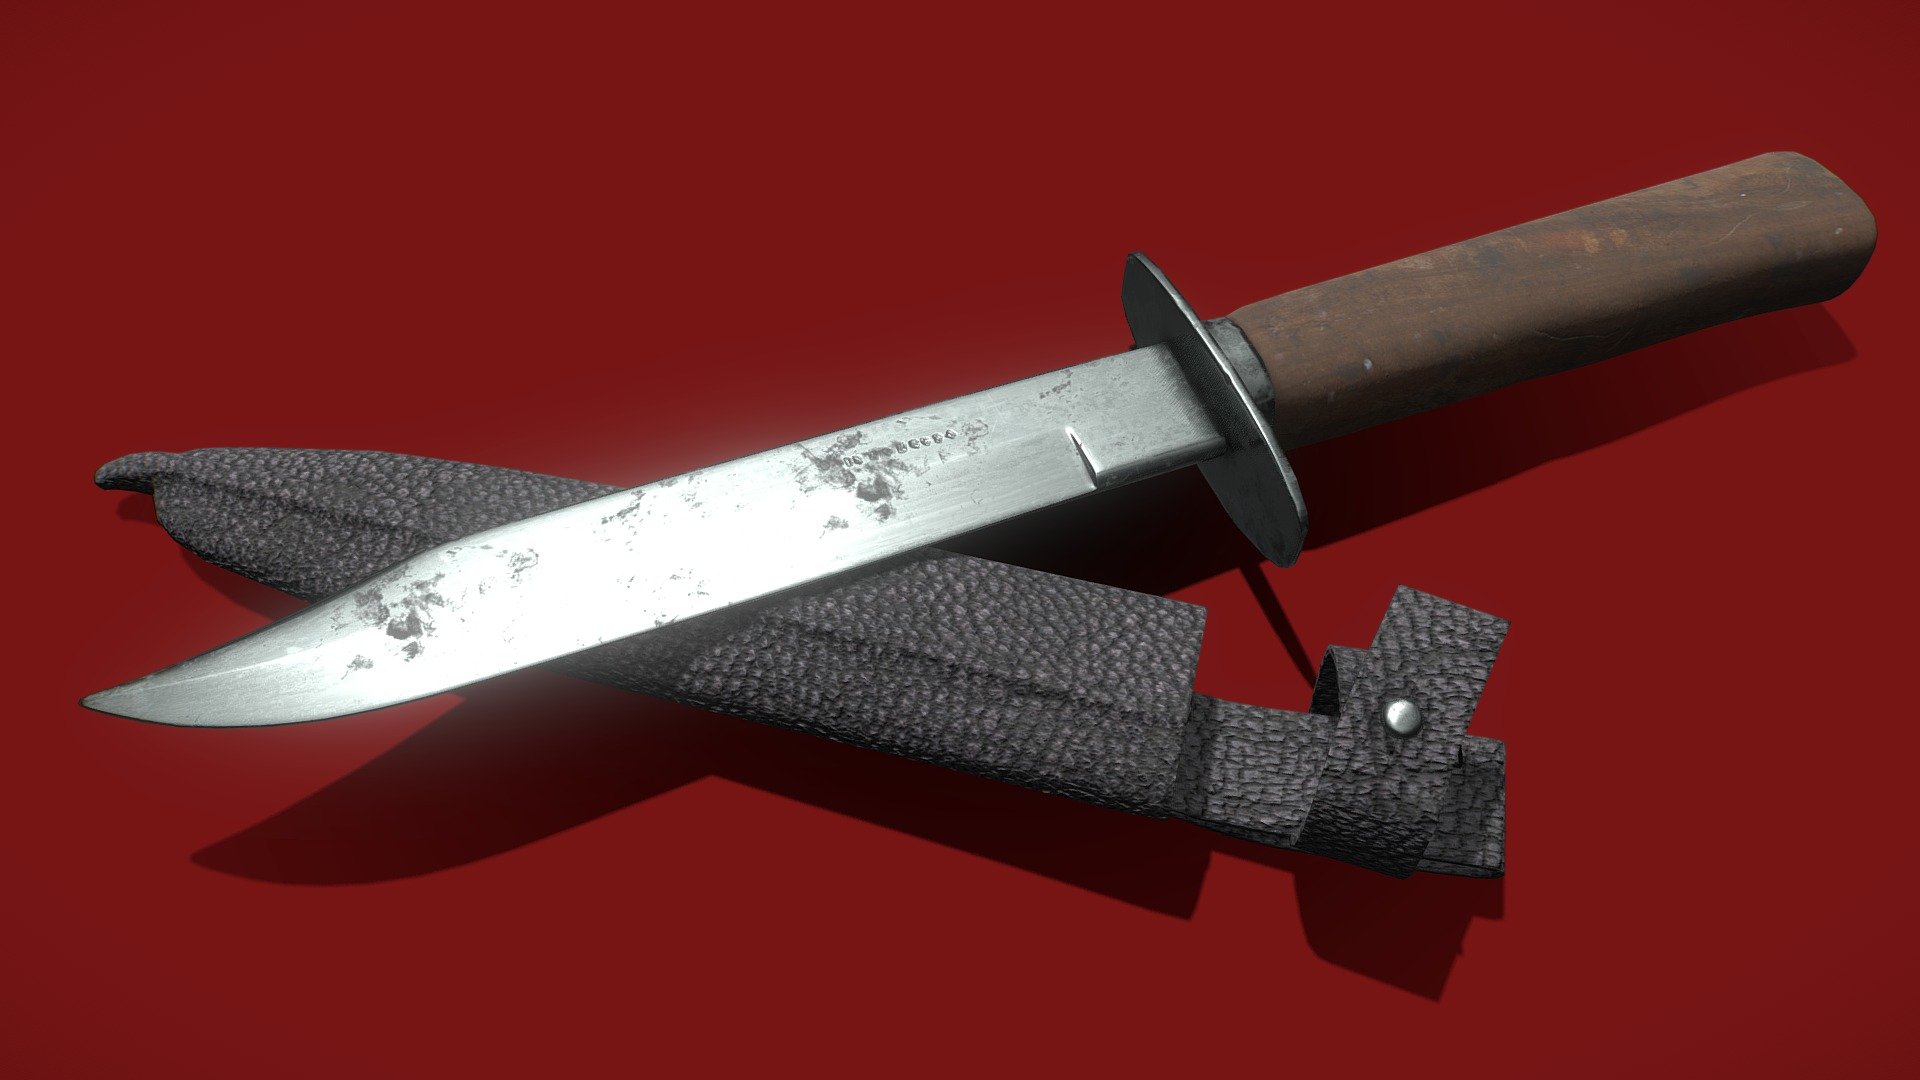 Model of a knife, widely used during the Great Patriotic War. Made in Blender for a personal project. Textures made in Quixel Mixer. This model is intended to be used in videogame 3d model